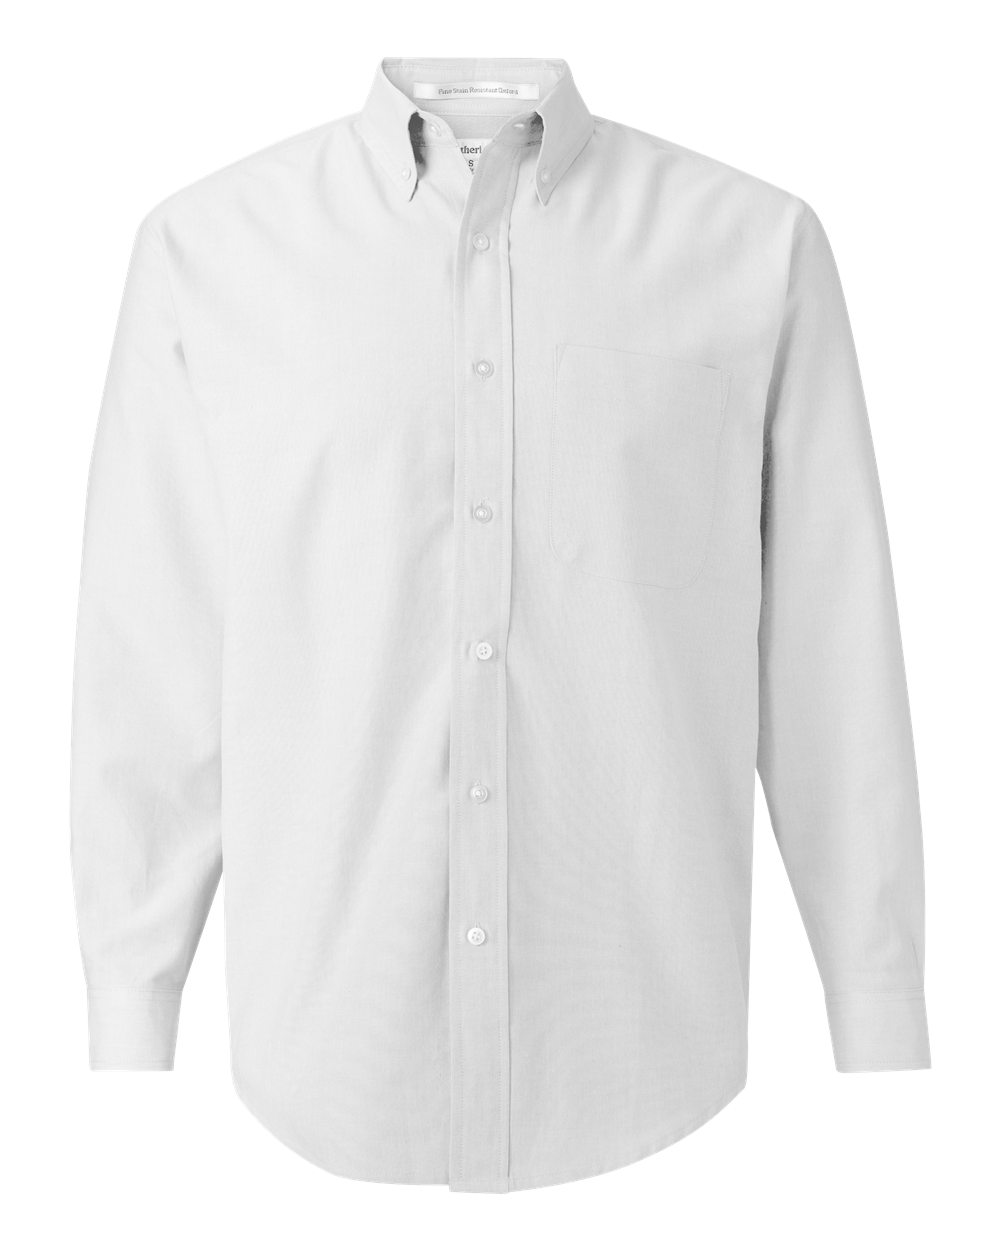 Long Sleeve Oxford Shirt Tall Sizes-FeatherLite